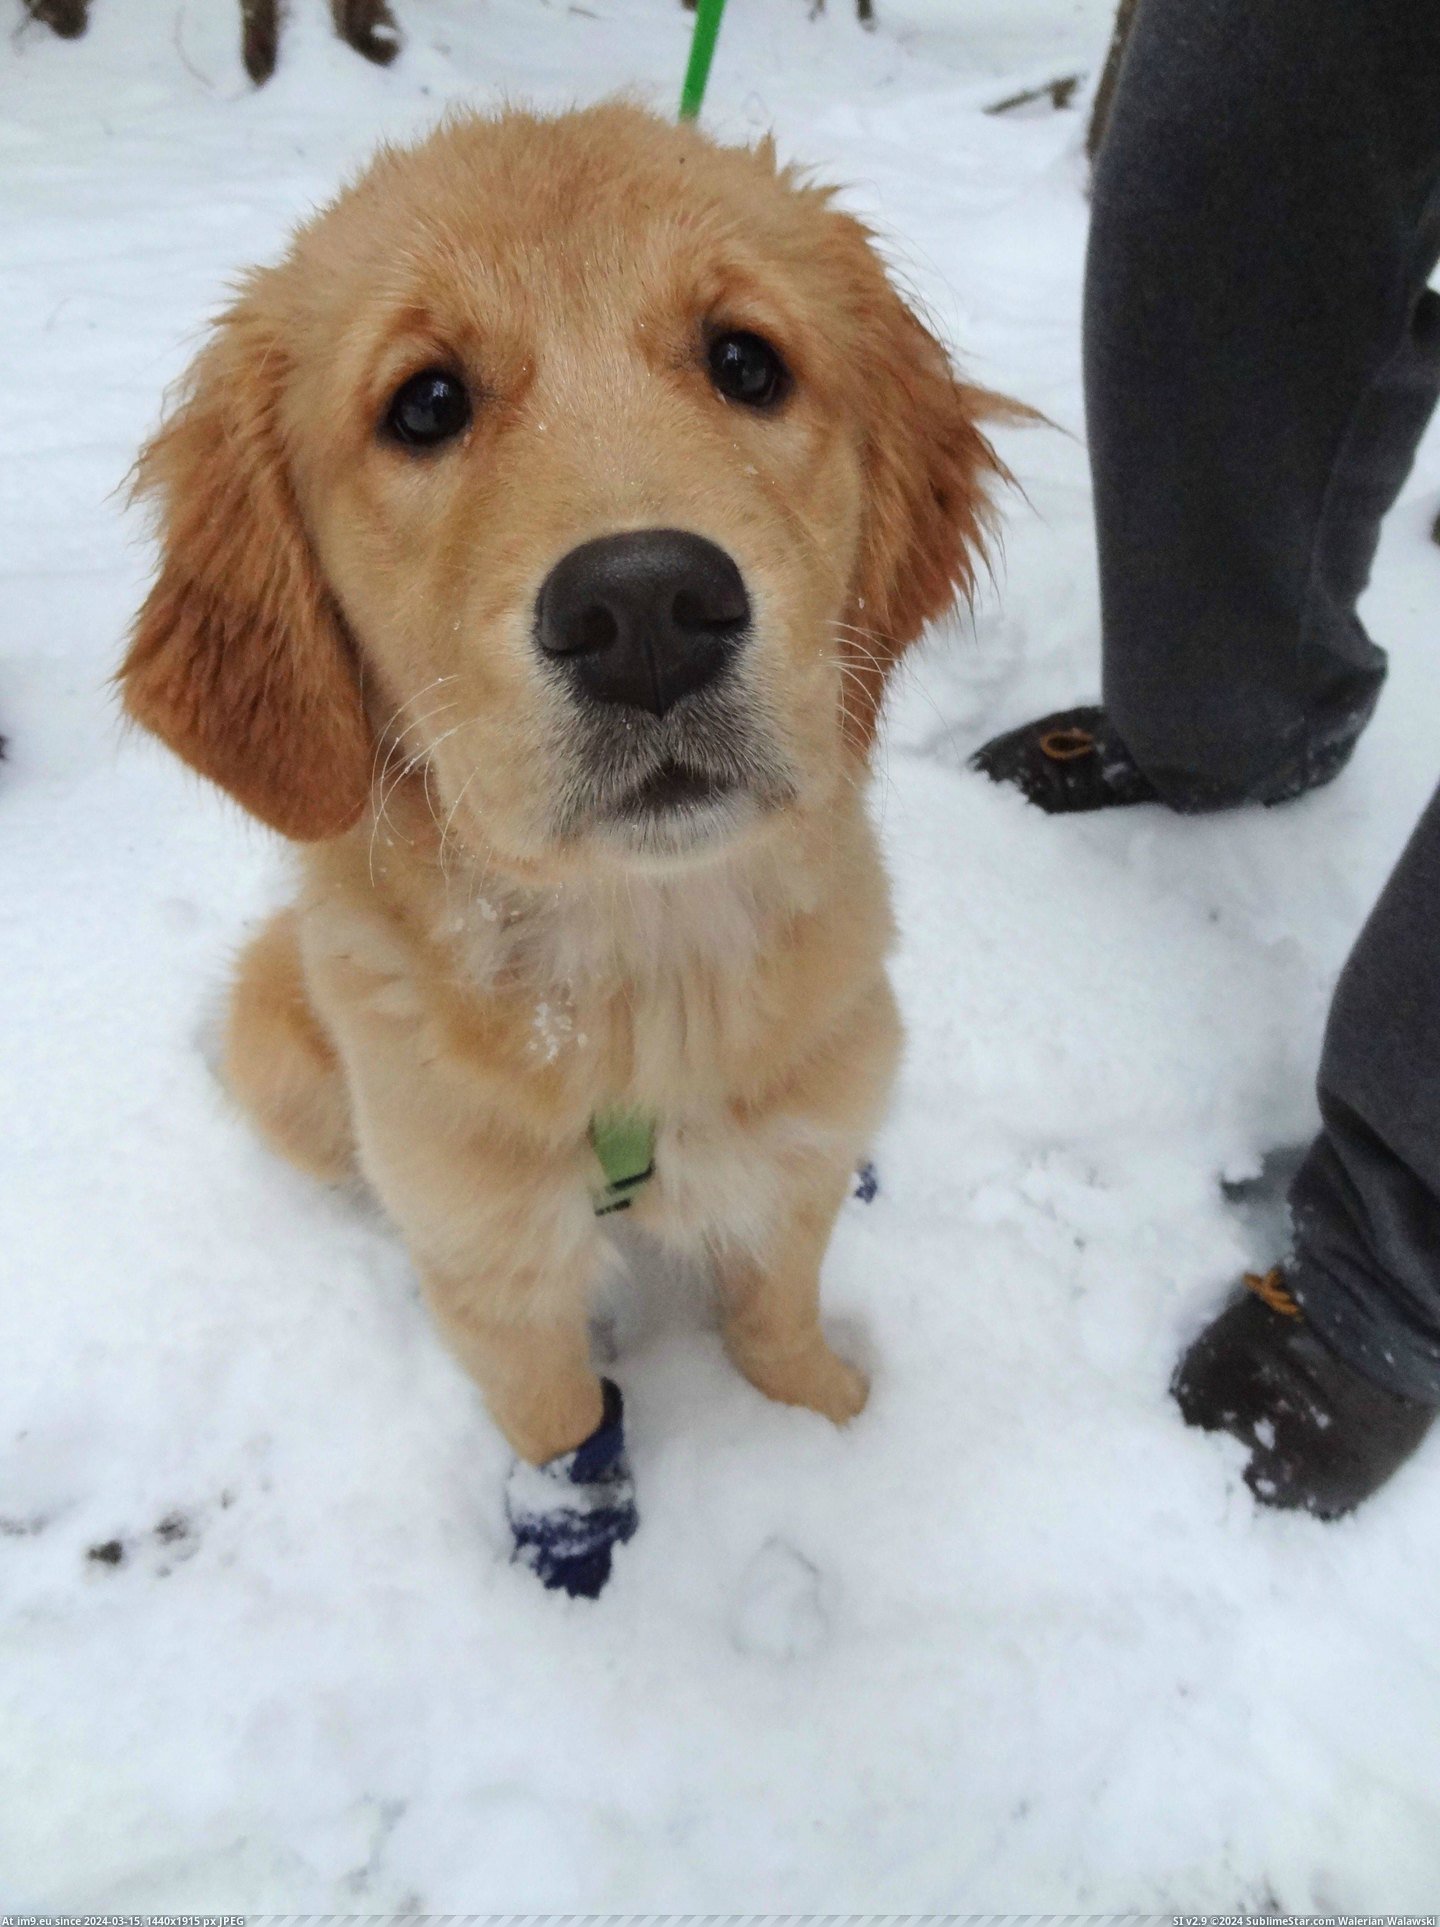 #One #Old #Eyes #Golden #Month #Walk #Booties #Snow #Our #Lost [Aww] My four-month-old Golden lost one of her booties on our walk in the snow. Those eyes! Pic. (Obraz z album My r/AWW favs))